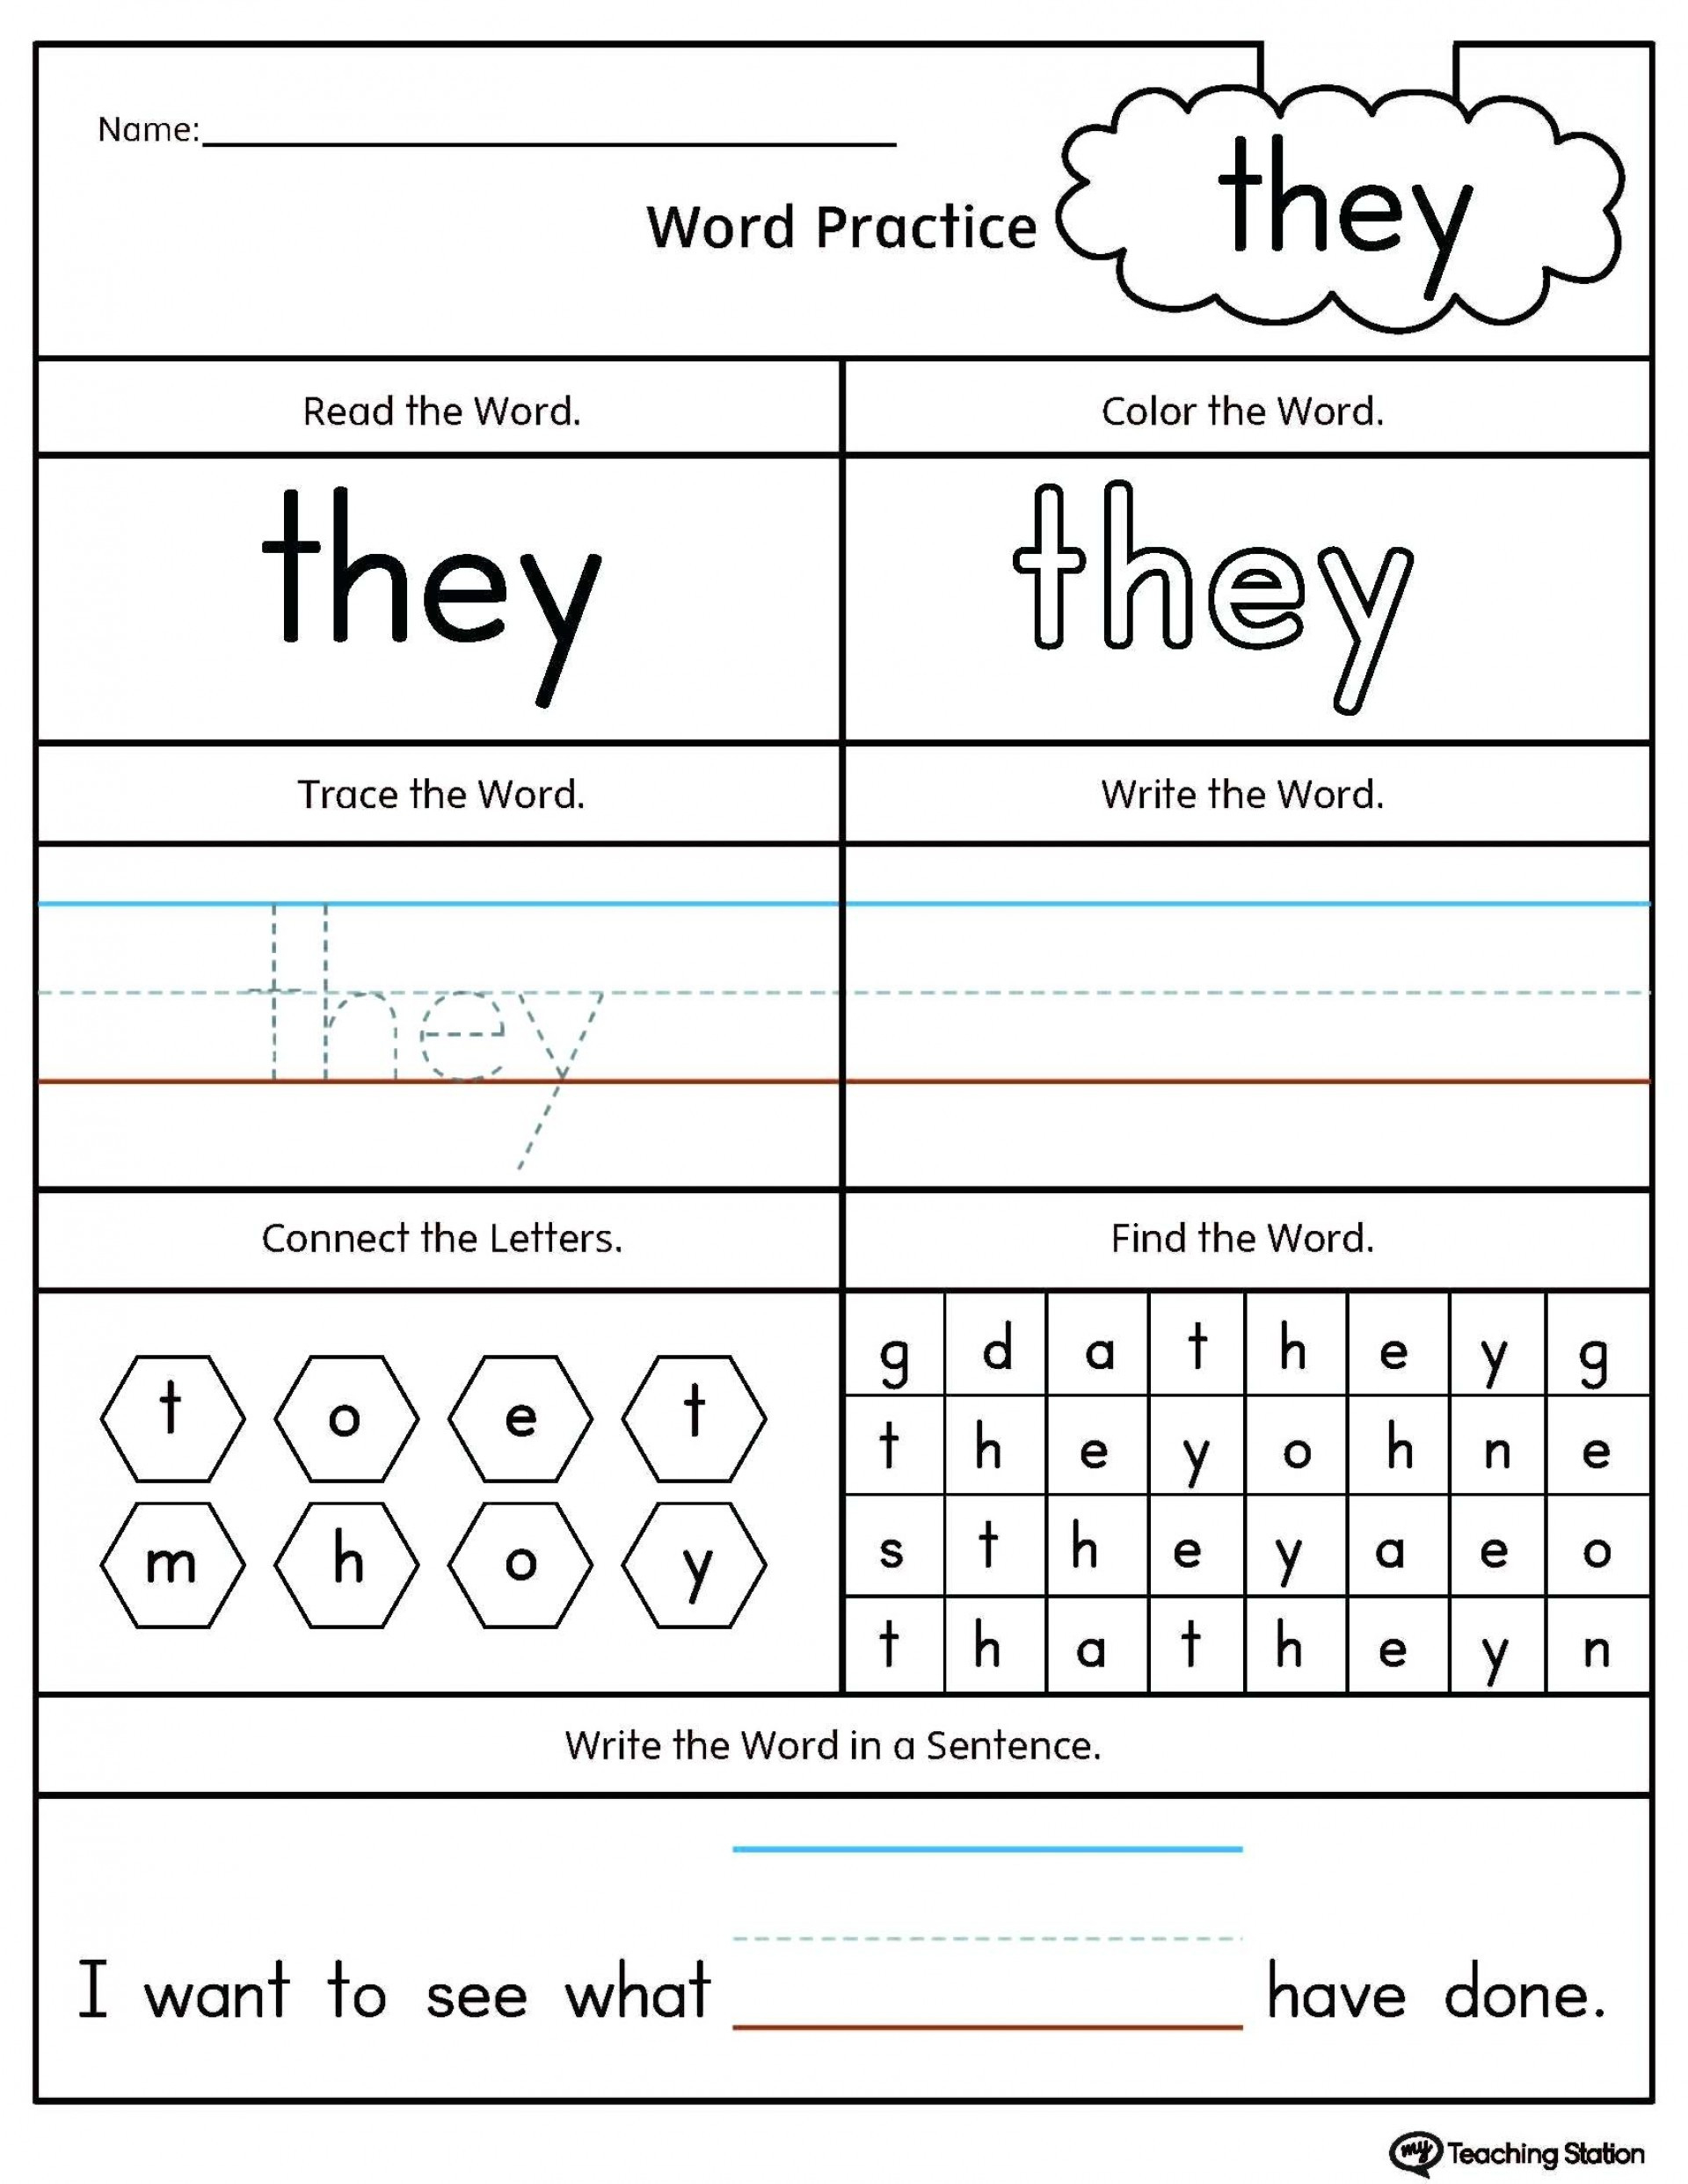 dolch-sight-words-printable-printable-world-holiday-sexiz-pix